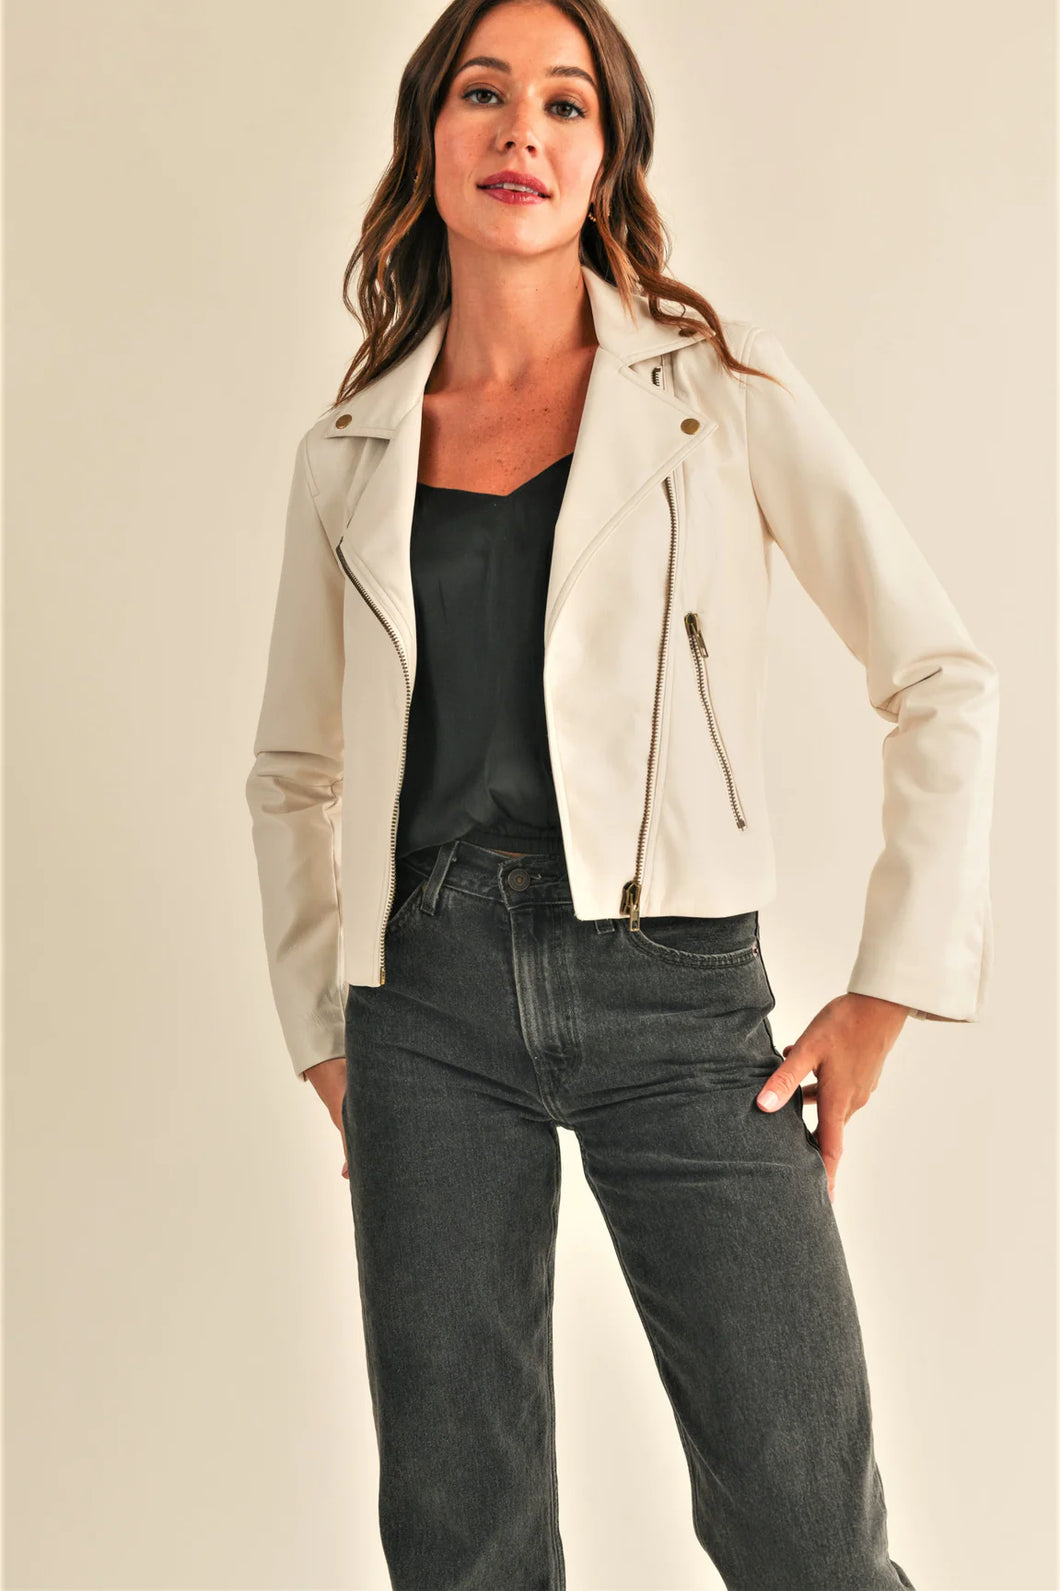 Juno off White Faux Leather Biker Style Jacket with Zip Detail